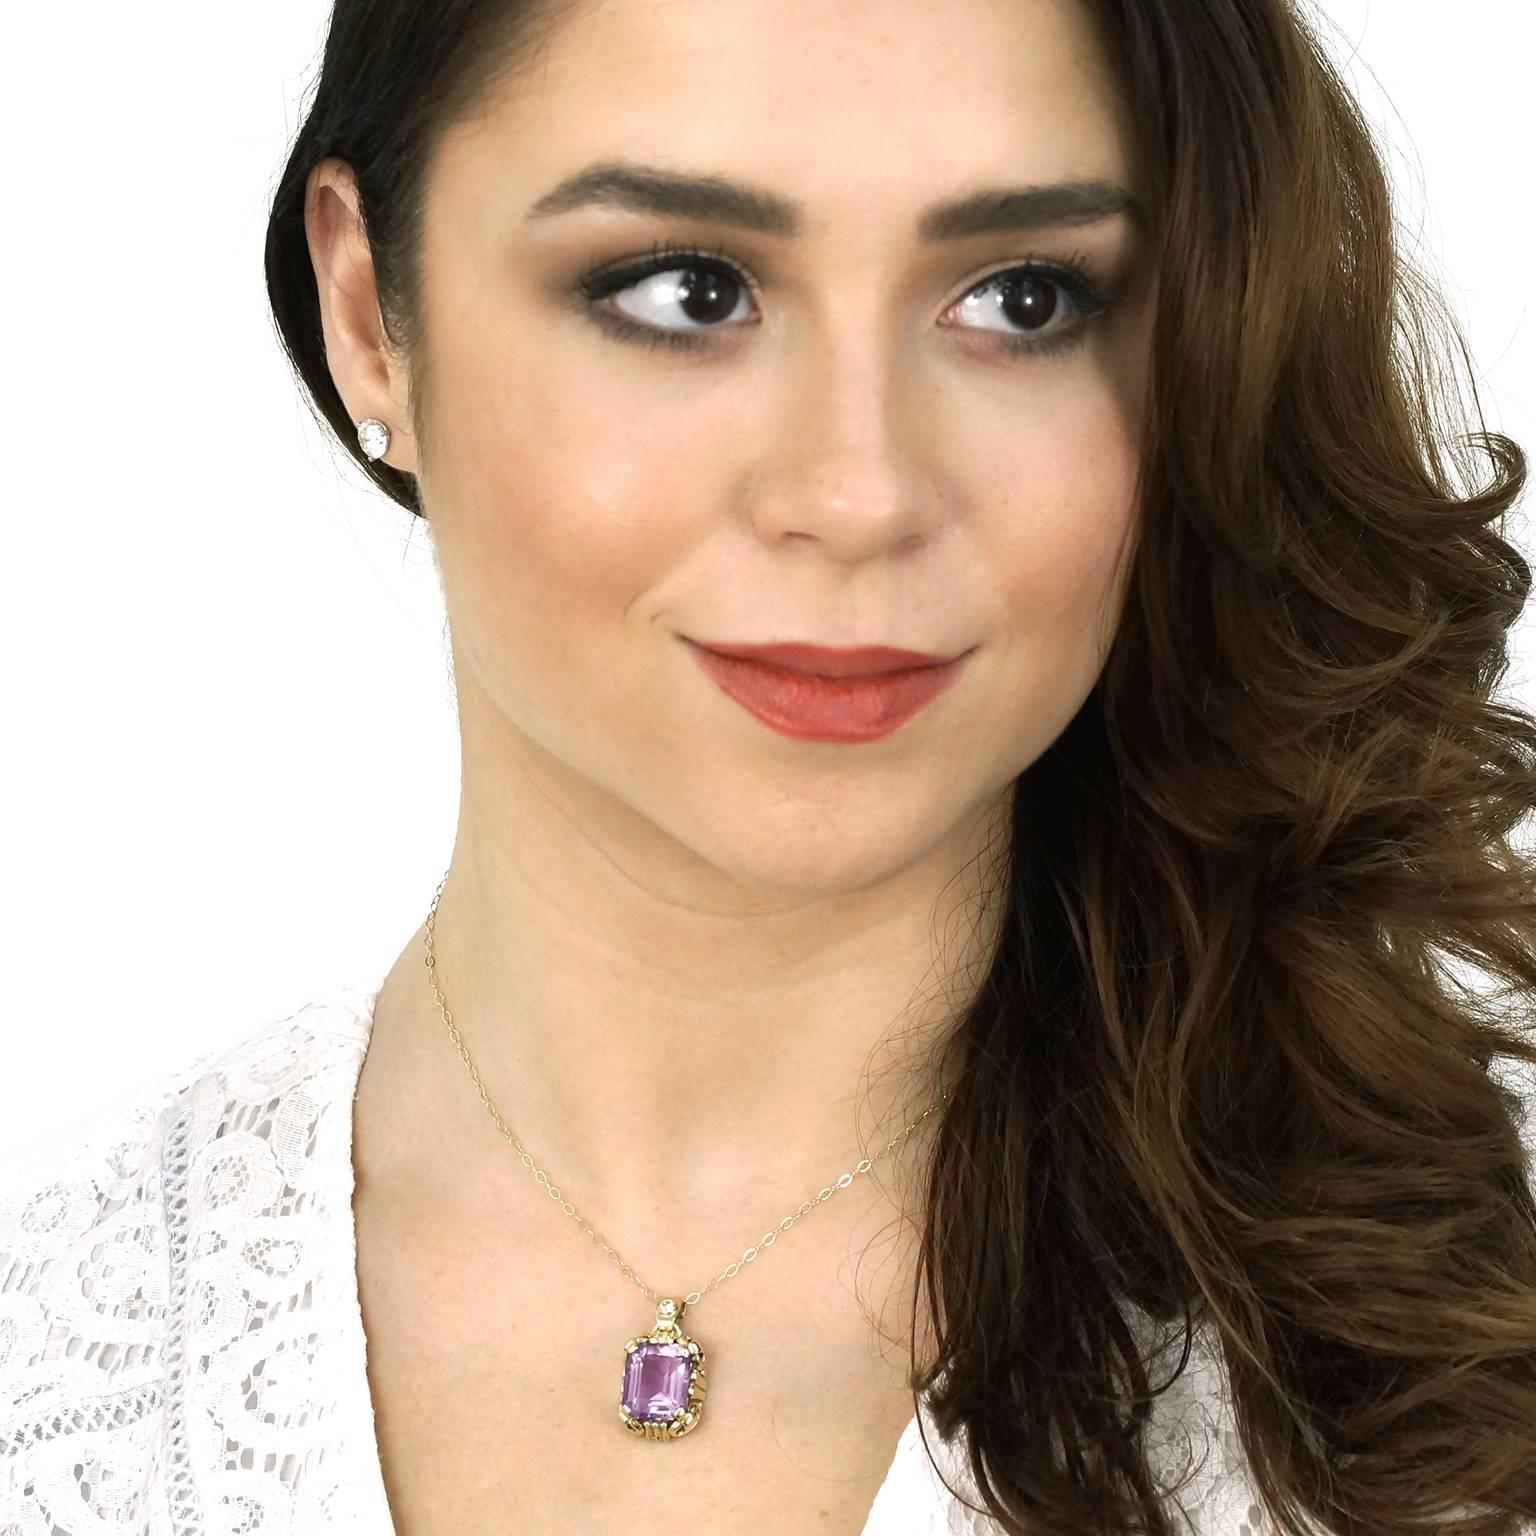 Circa 1960s, 14k, American.  This stylish pendant features a lush 11 carat Rose de France amethyst and a brilliant .10 carat diamond (I color, SI1 clarity).  Its stylish Deco-meets-modern look is underscored by meticulous fabrication. 

Noted,